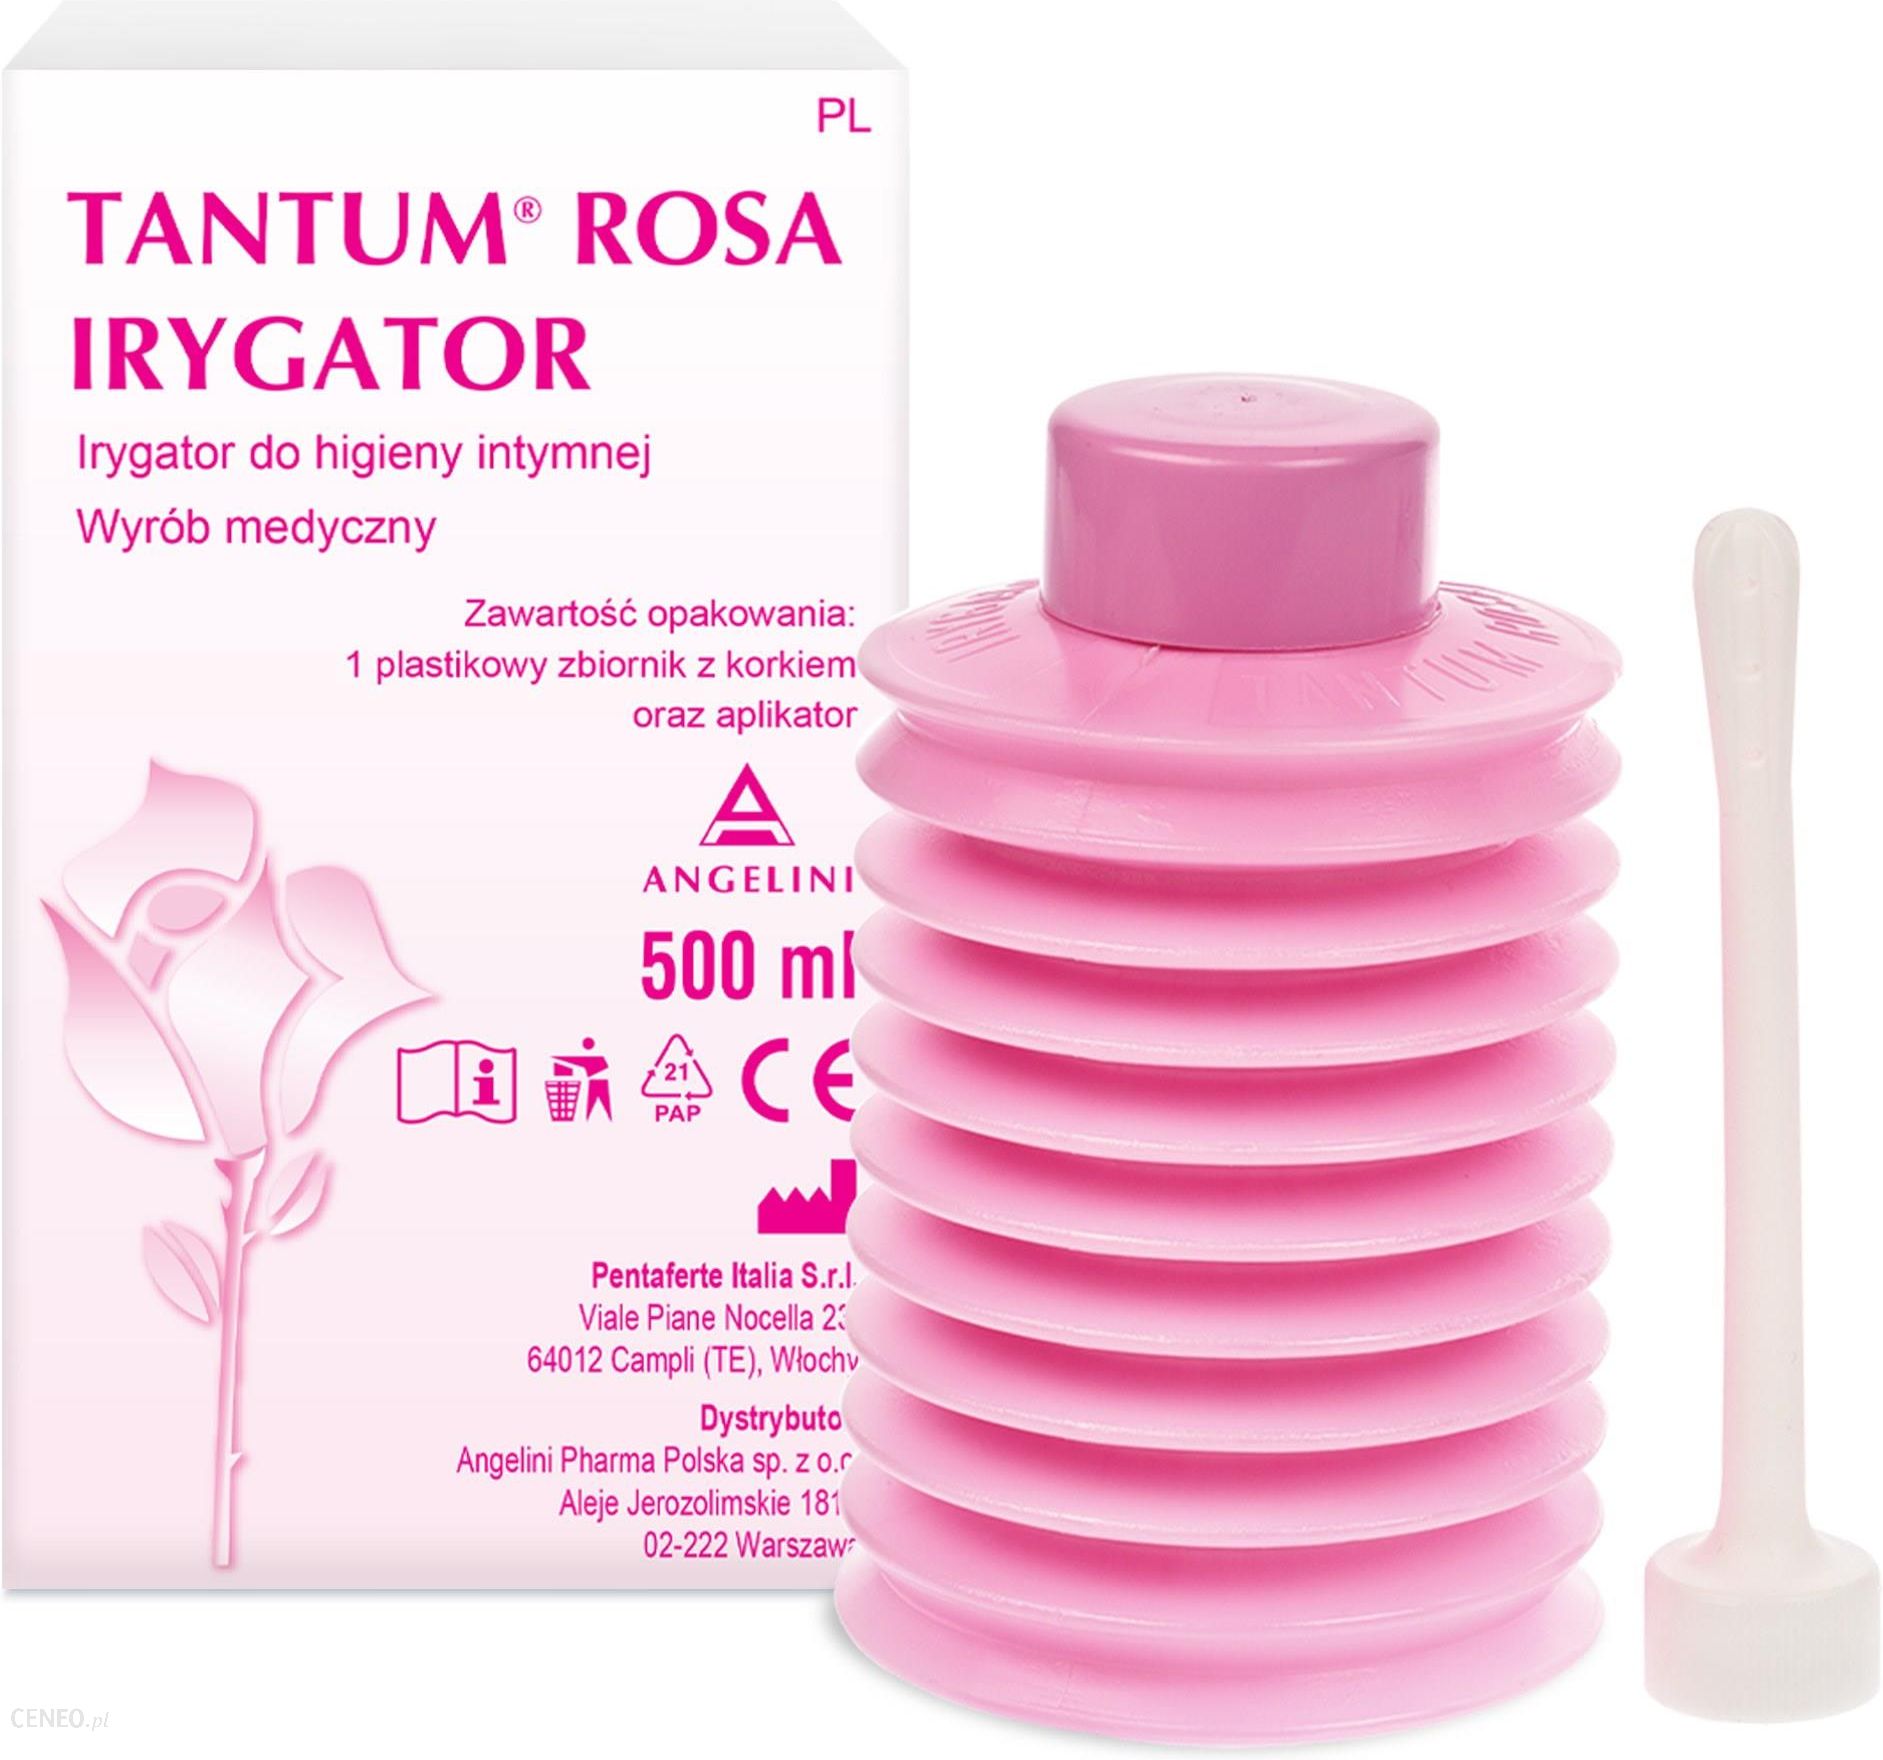 Rosa tantum [Experience with